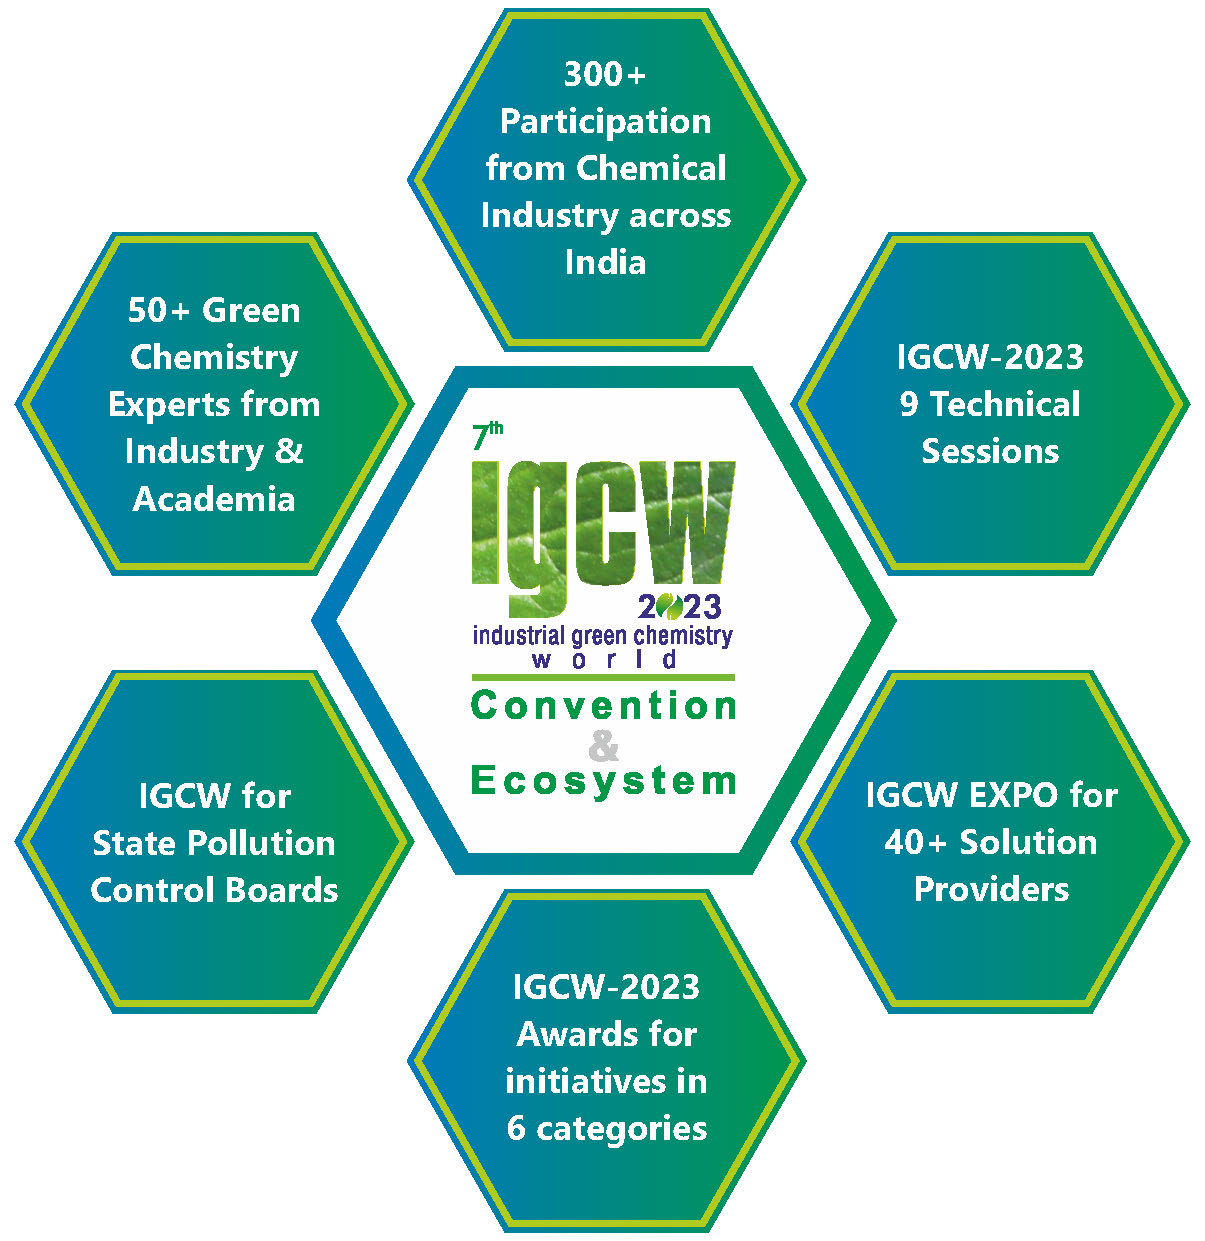 IGCW 23 Convention and Ecosystem